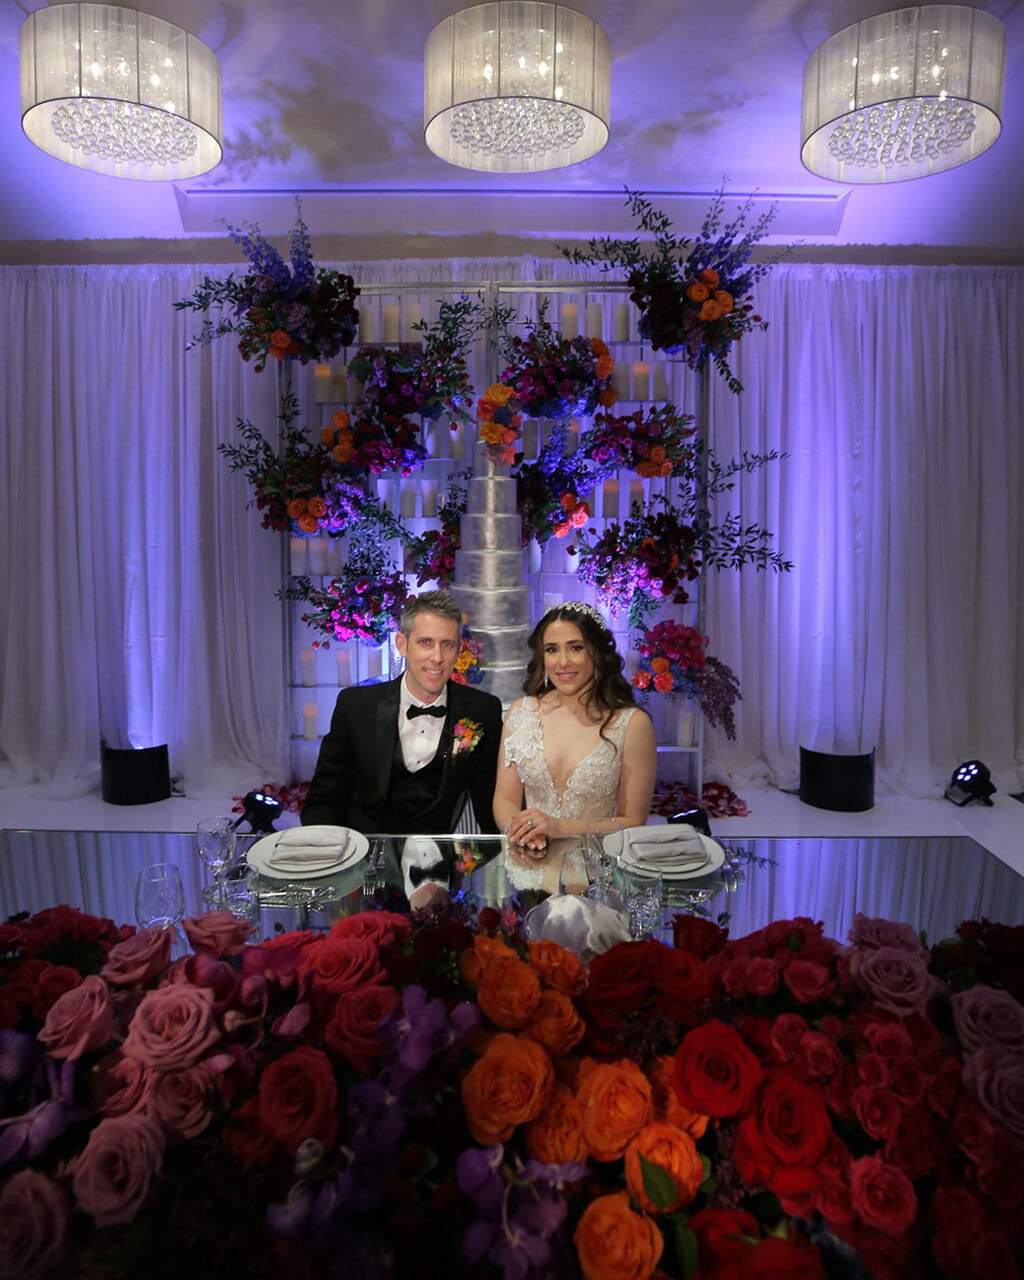 sweetheart table covered in flowers with bride and groom kissing